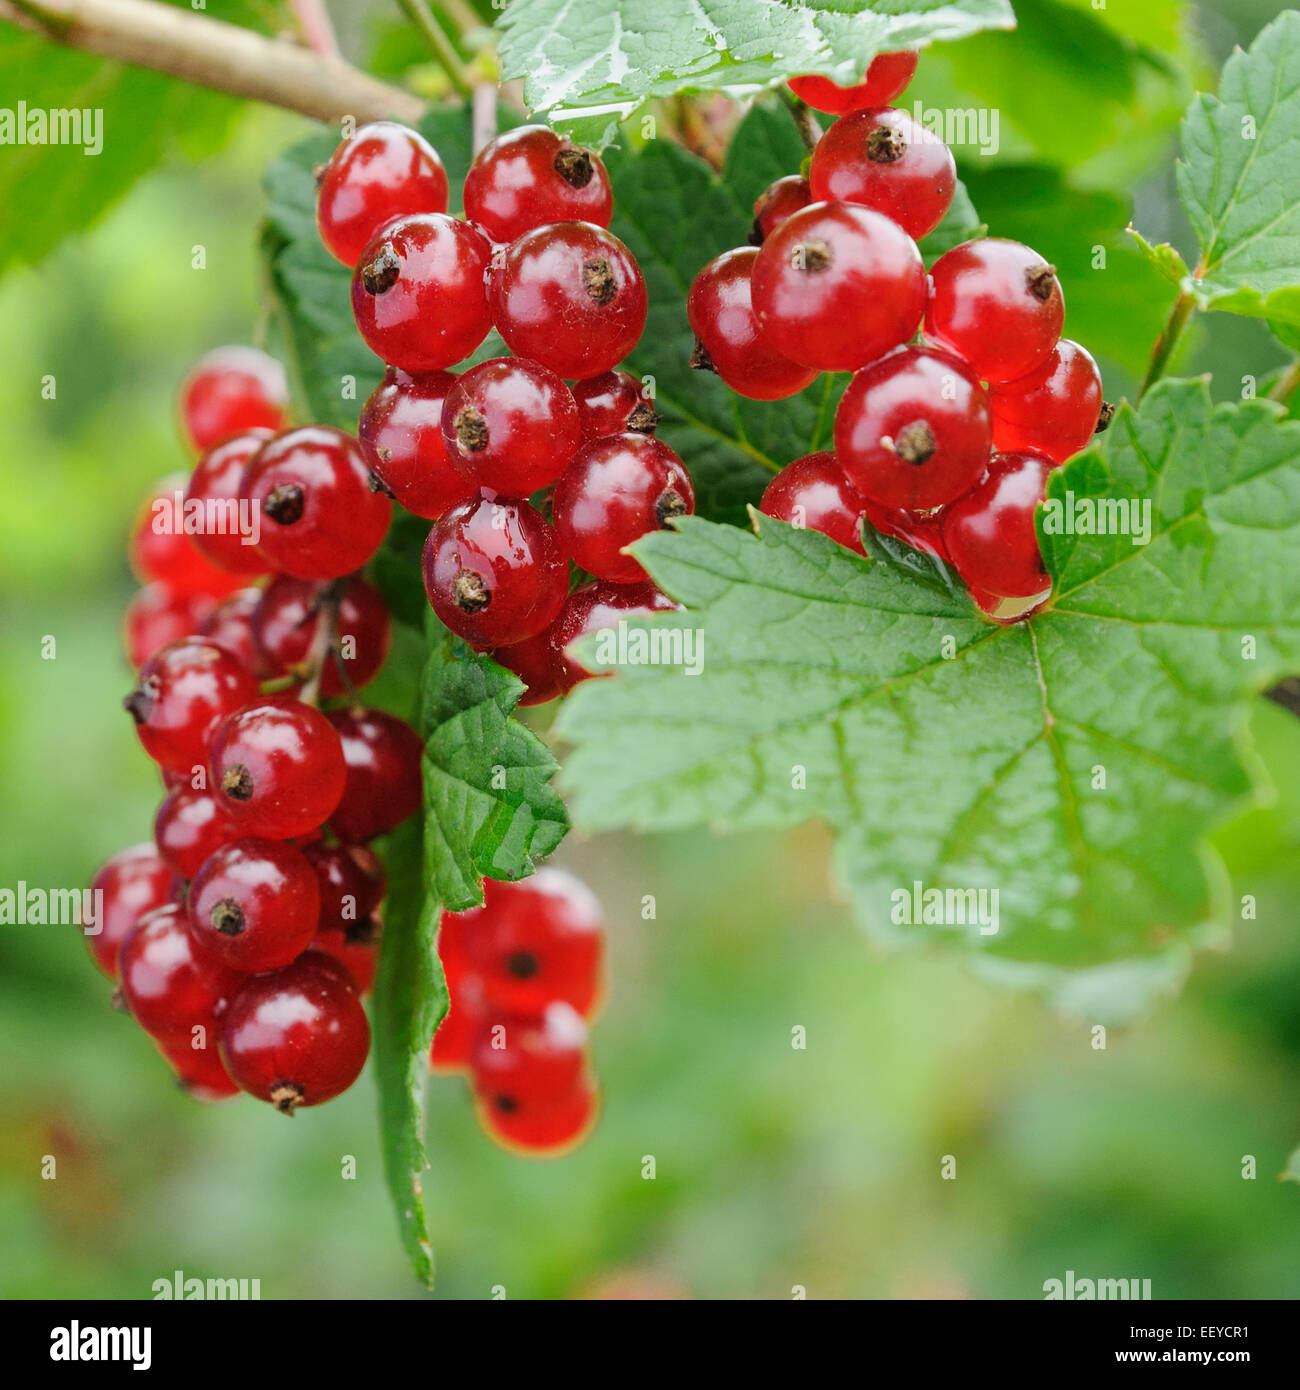 bunch of red currant on the bush Stock Photo